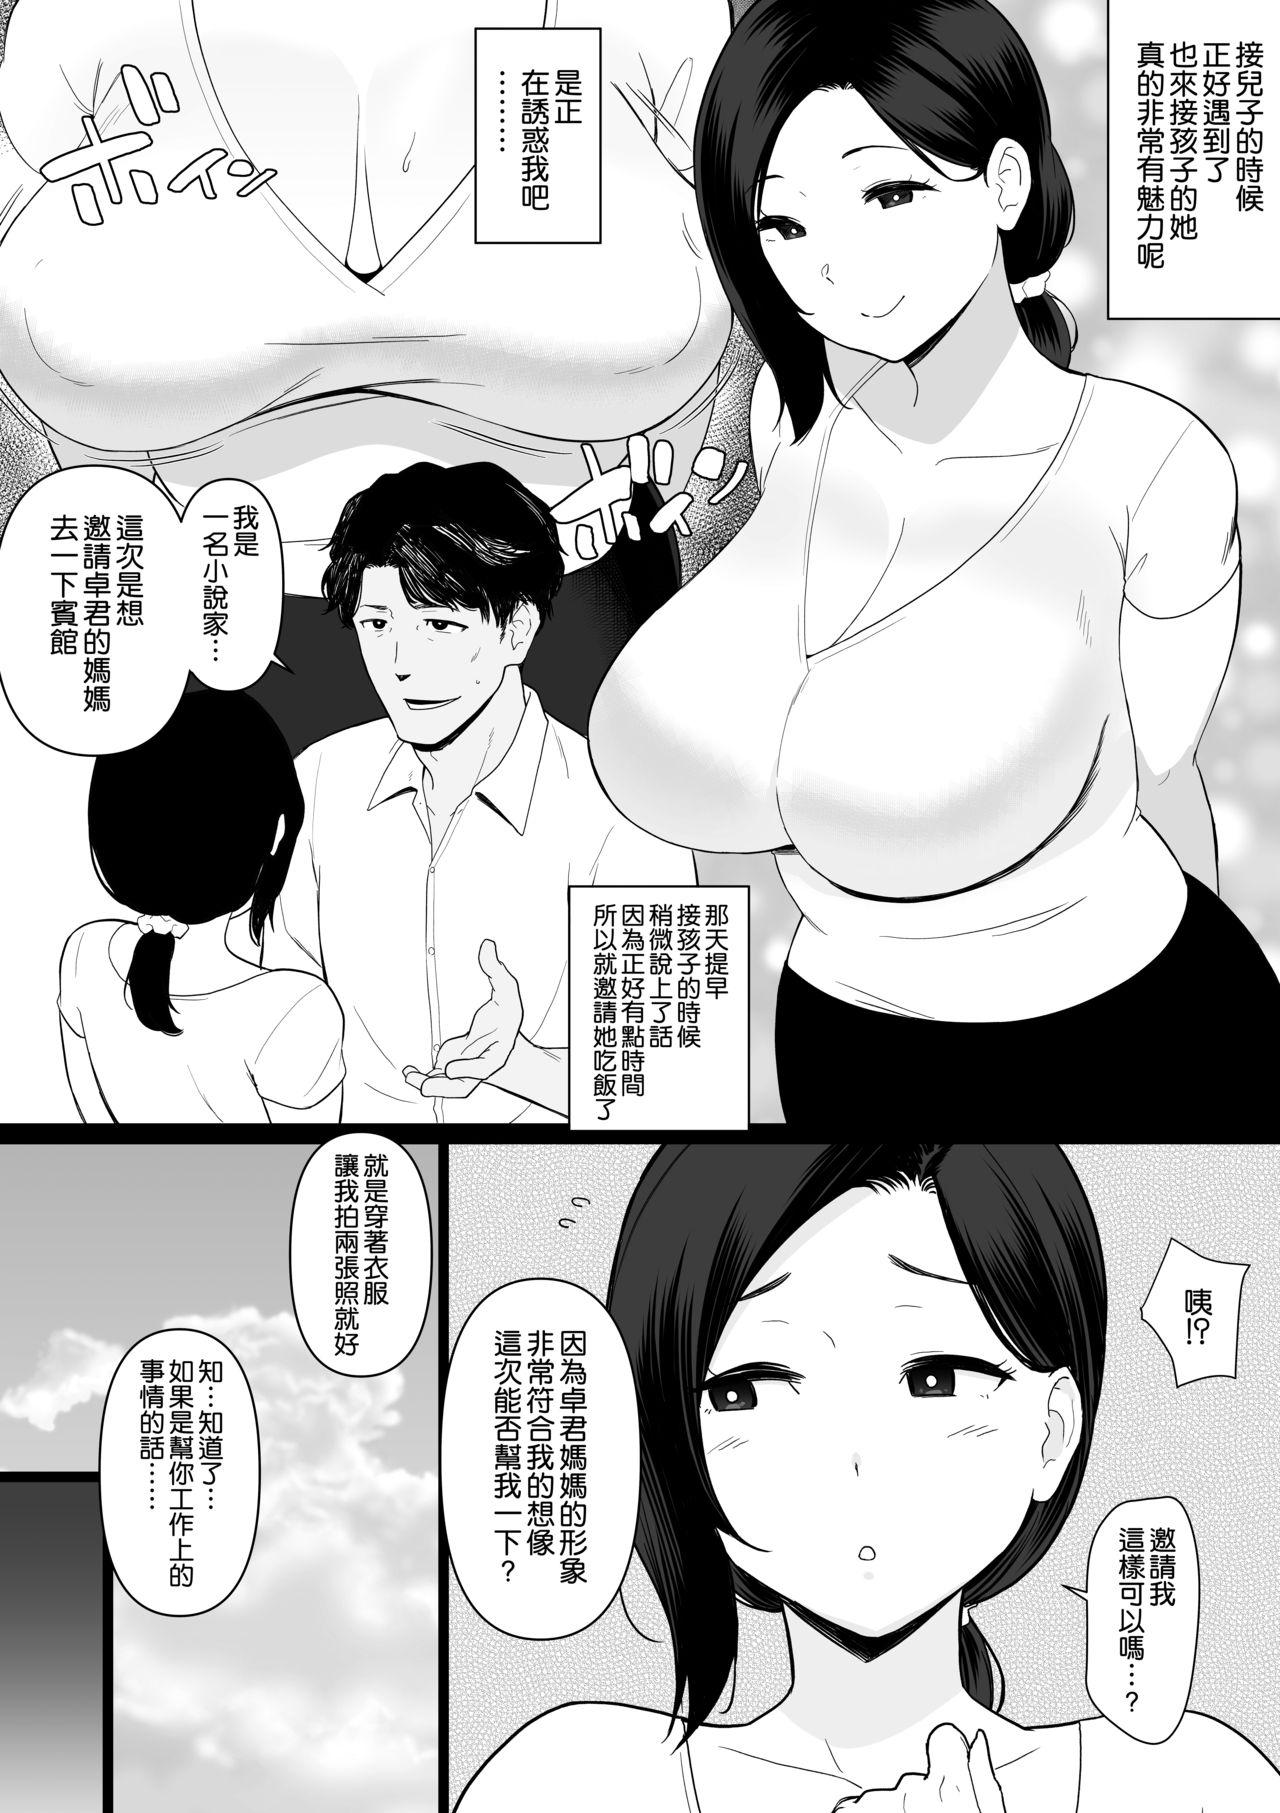 Sweet お母さんいただきます。サイドストーリー3 牛漫画短編集 Ch.1 - Original Clothed - Page 2